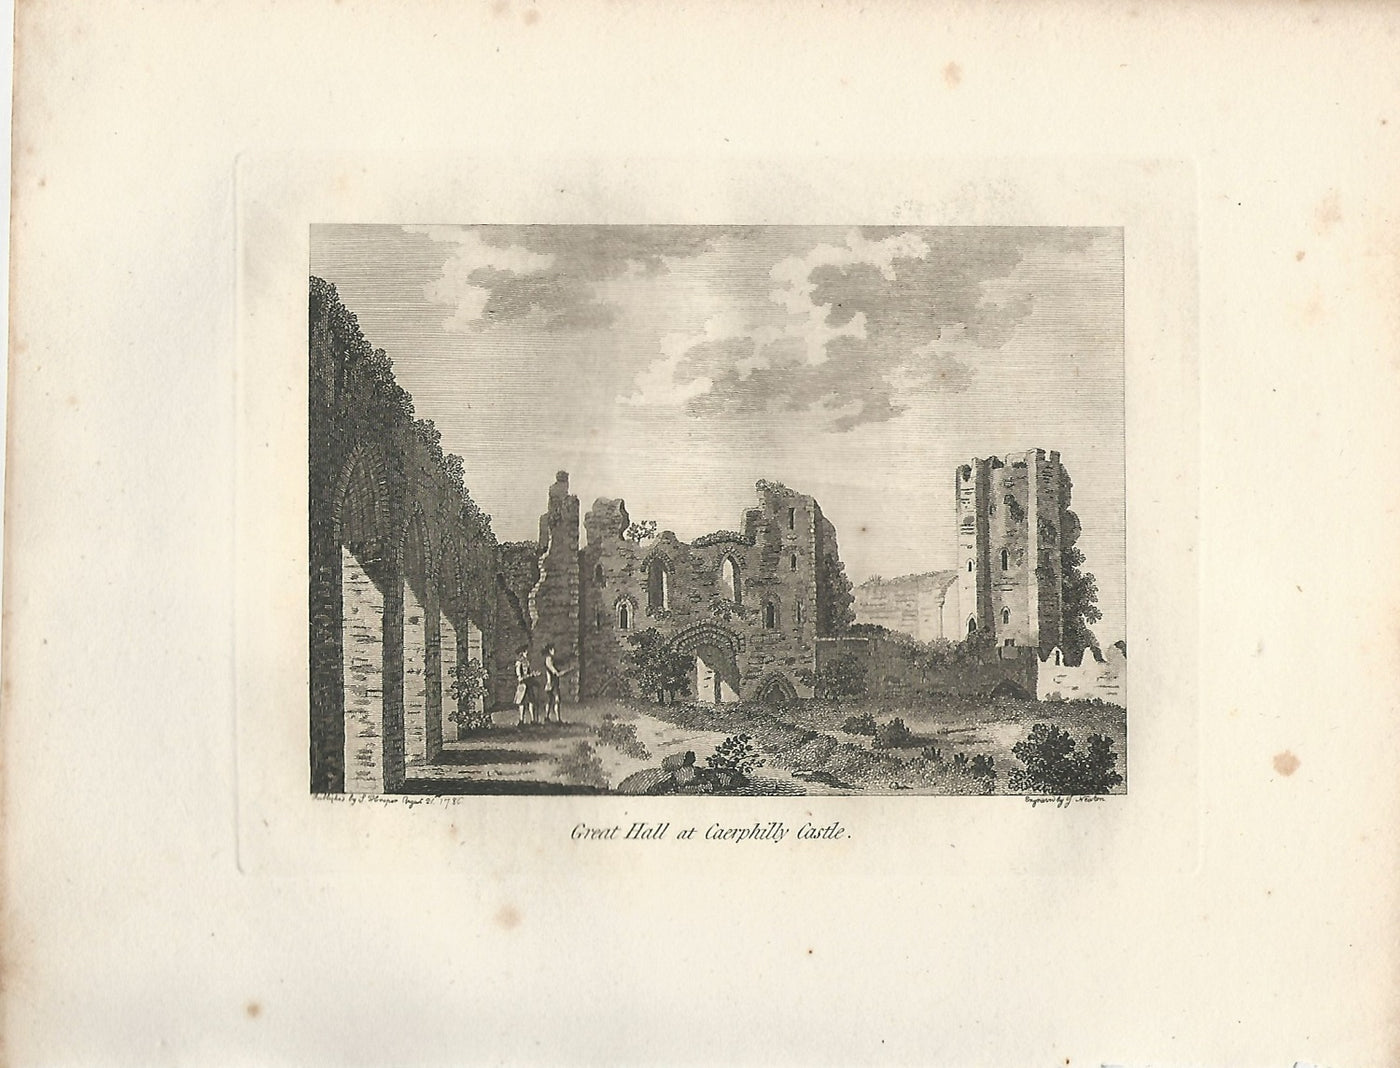 Caerphilly Castle's Great Hall antique print dated 1786